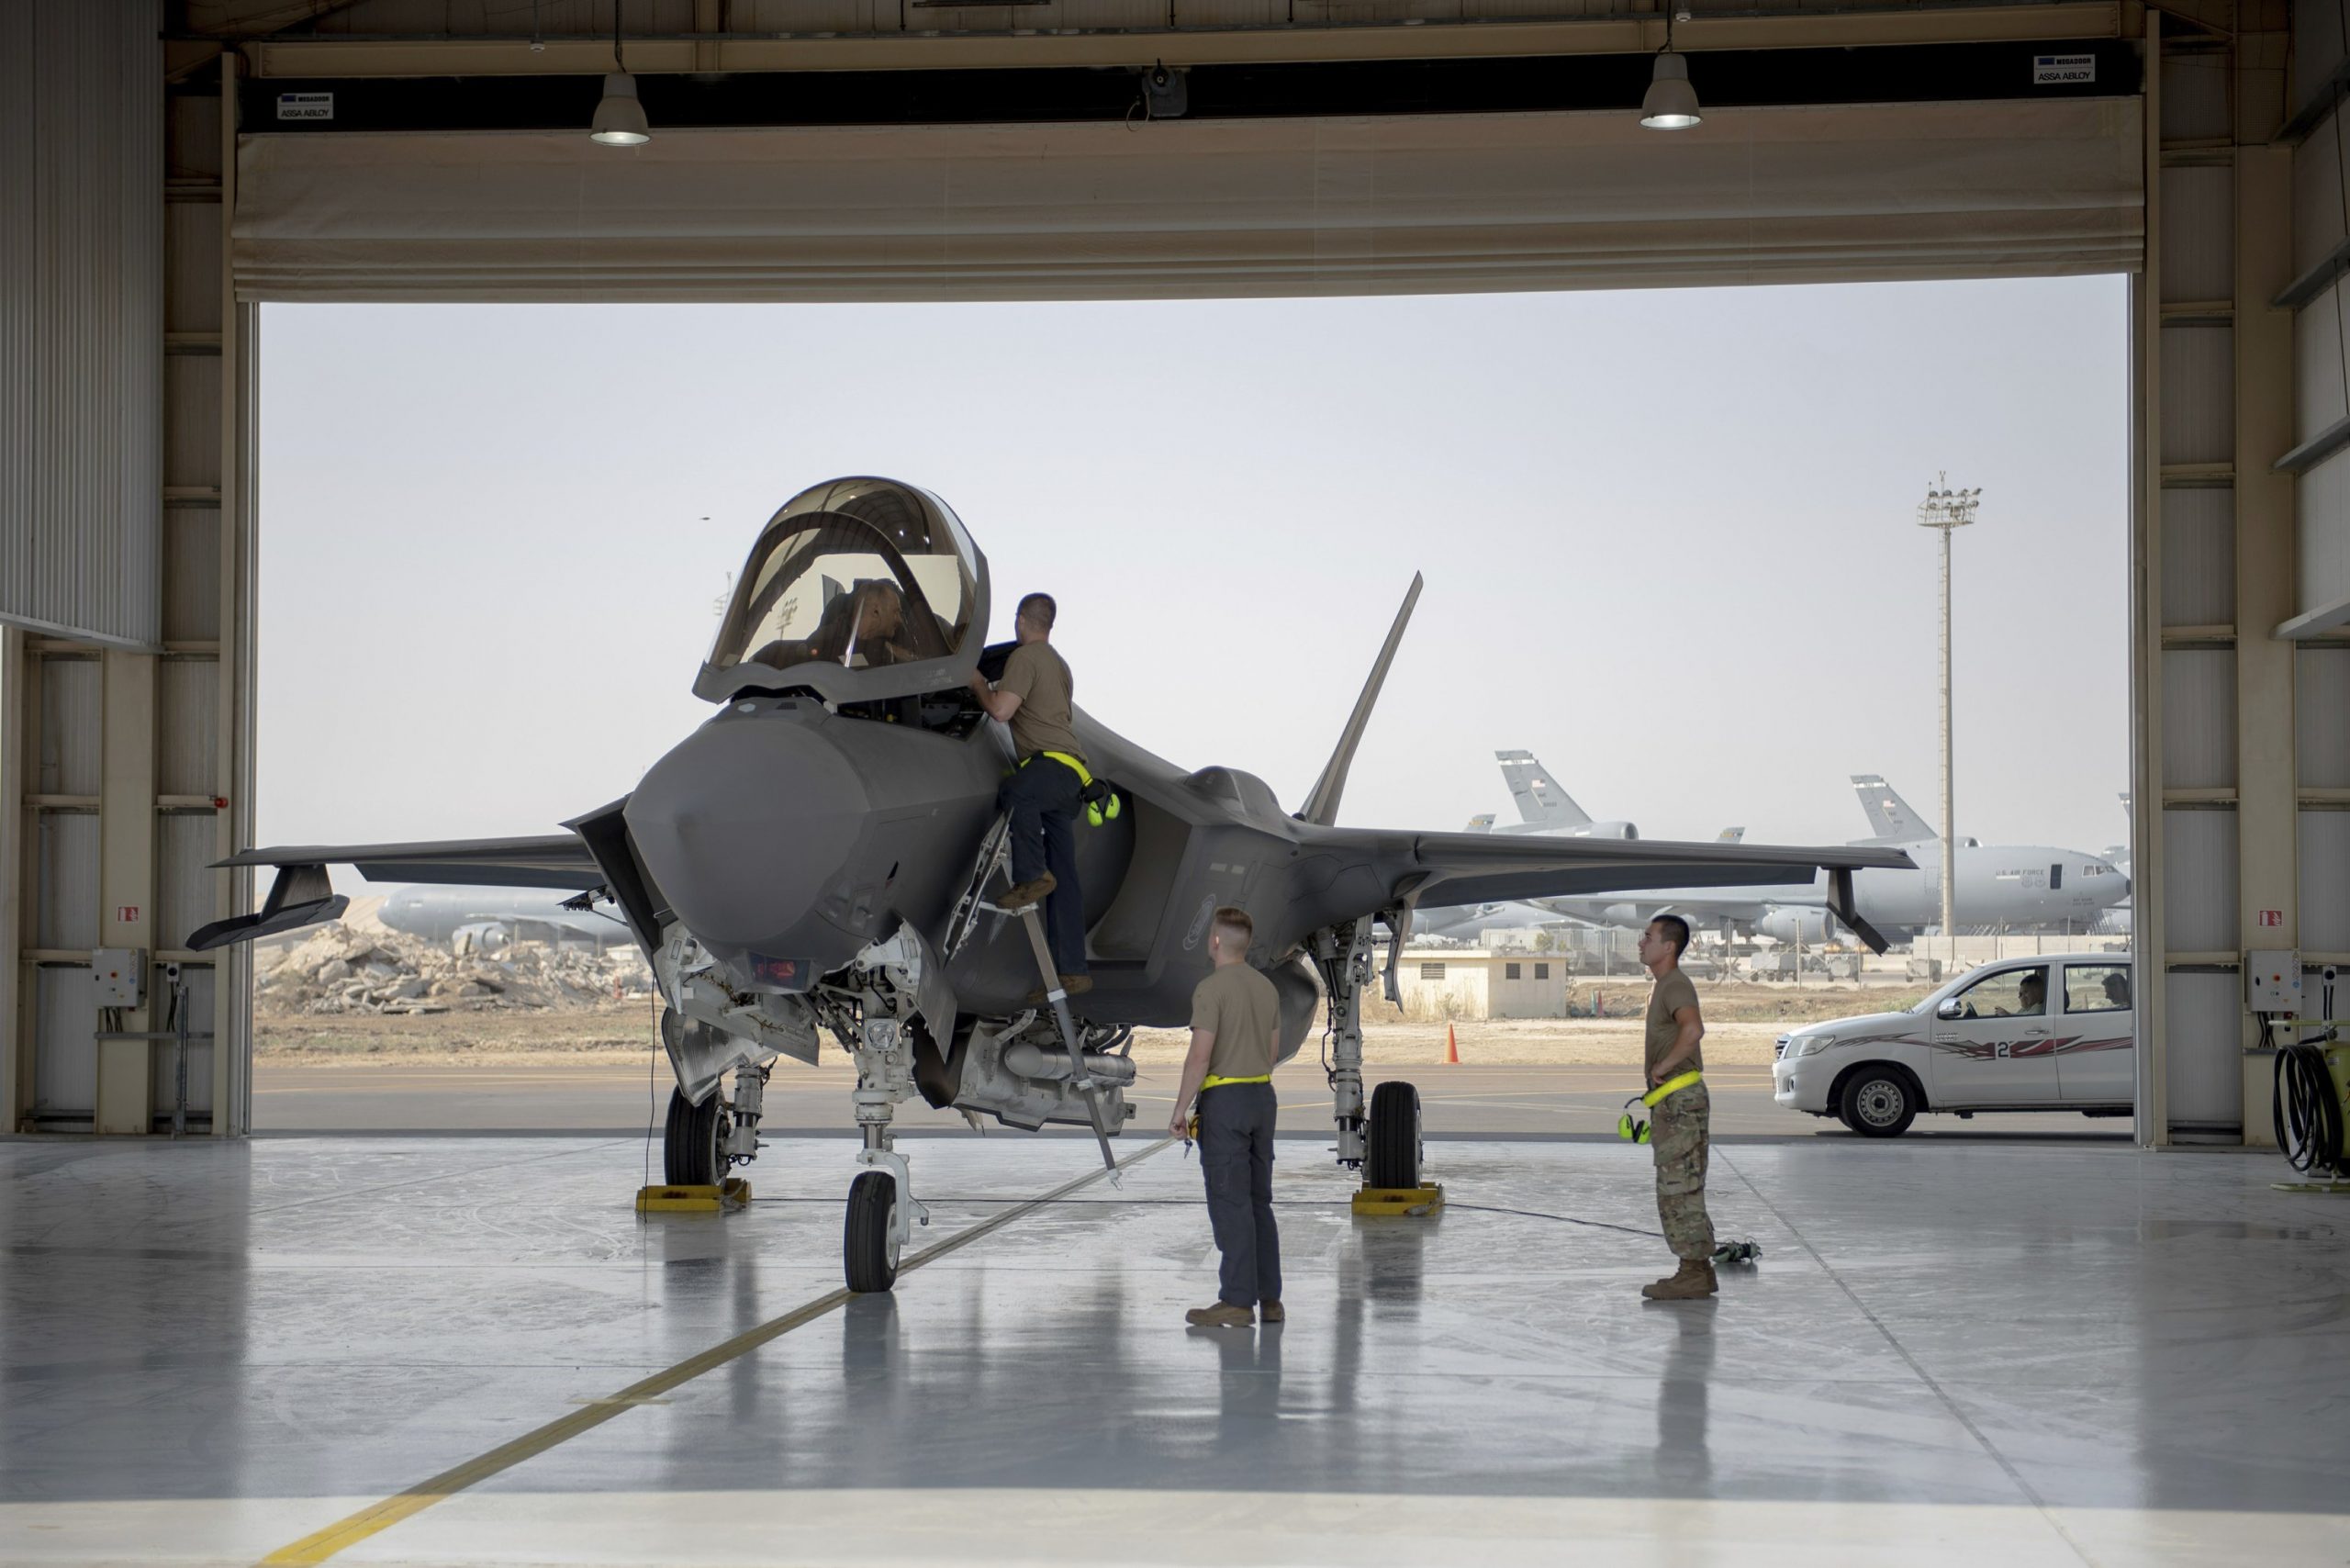 The United States plans to sell F-35 fighter jets to the UAE under the F23B arms deal